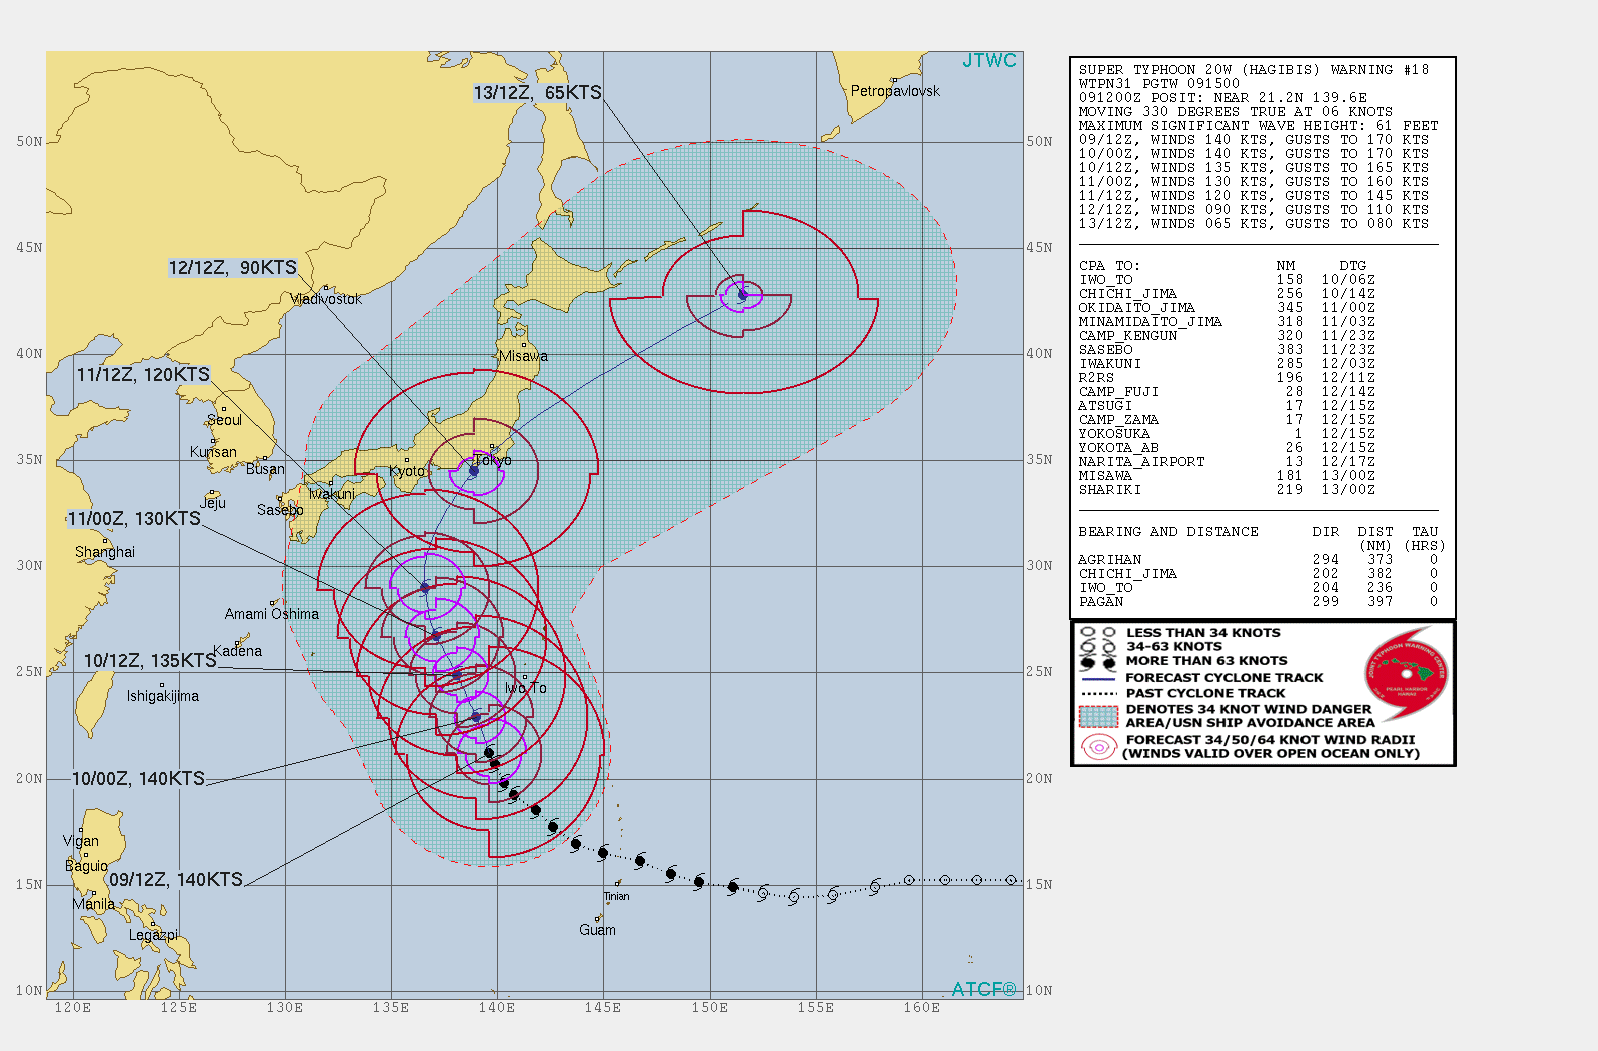 CURRENT INTENSITY SET AT 140KTS. FORECAST TO WEAKEN NEXT 72H WHILE APPROACHING TOKYO AREA